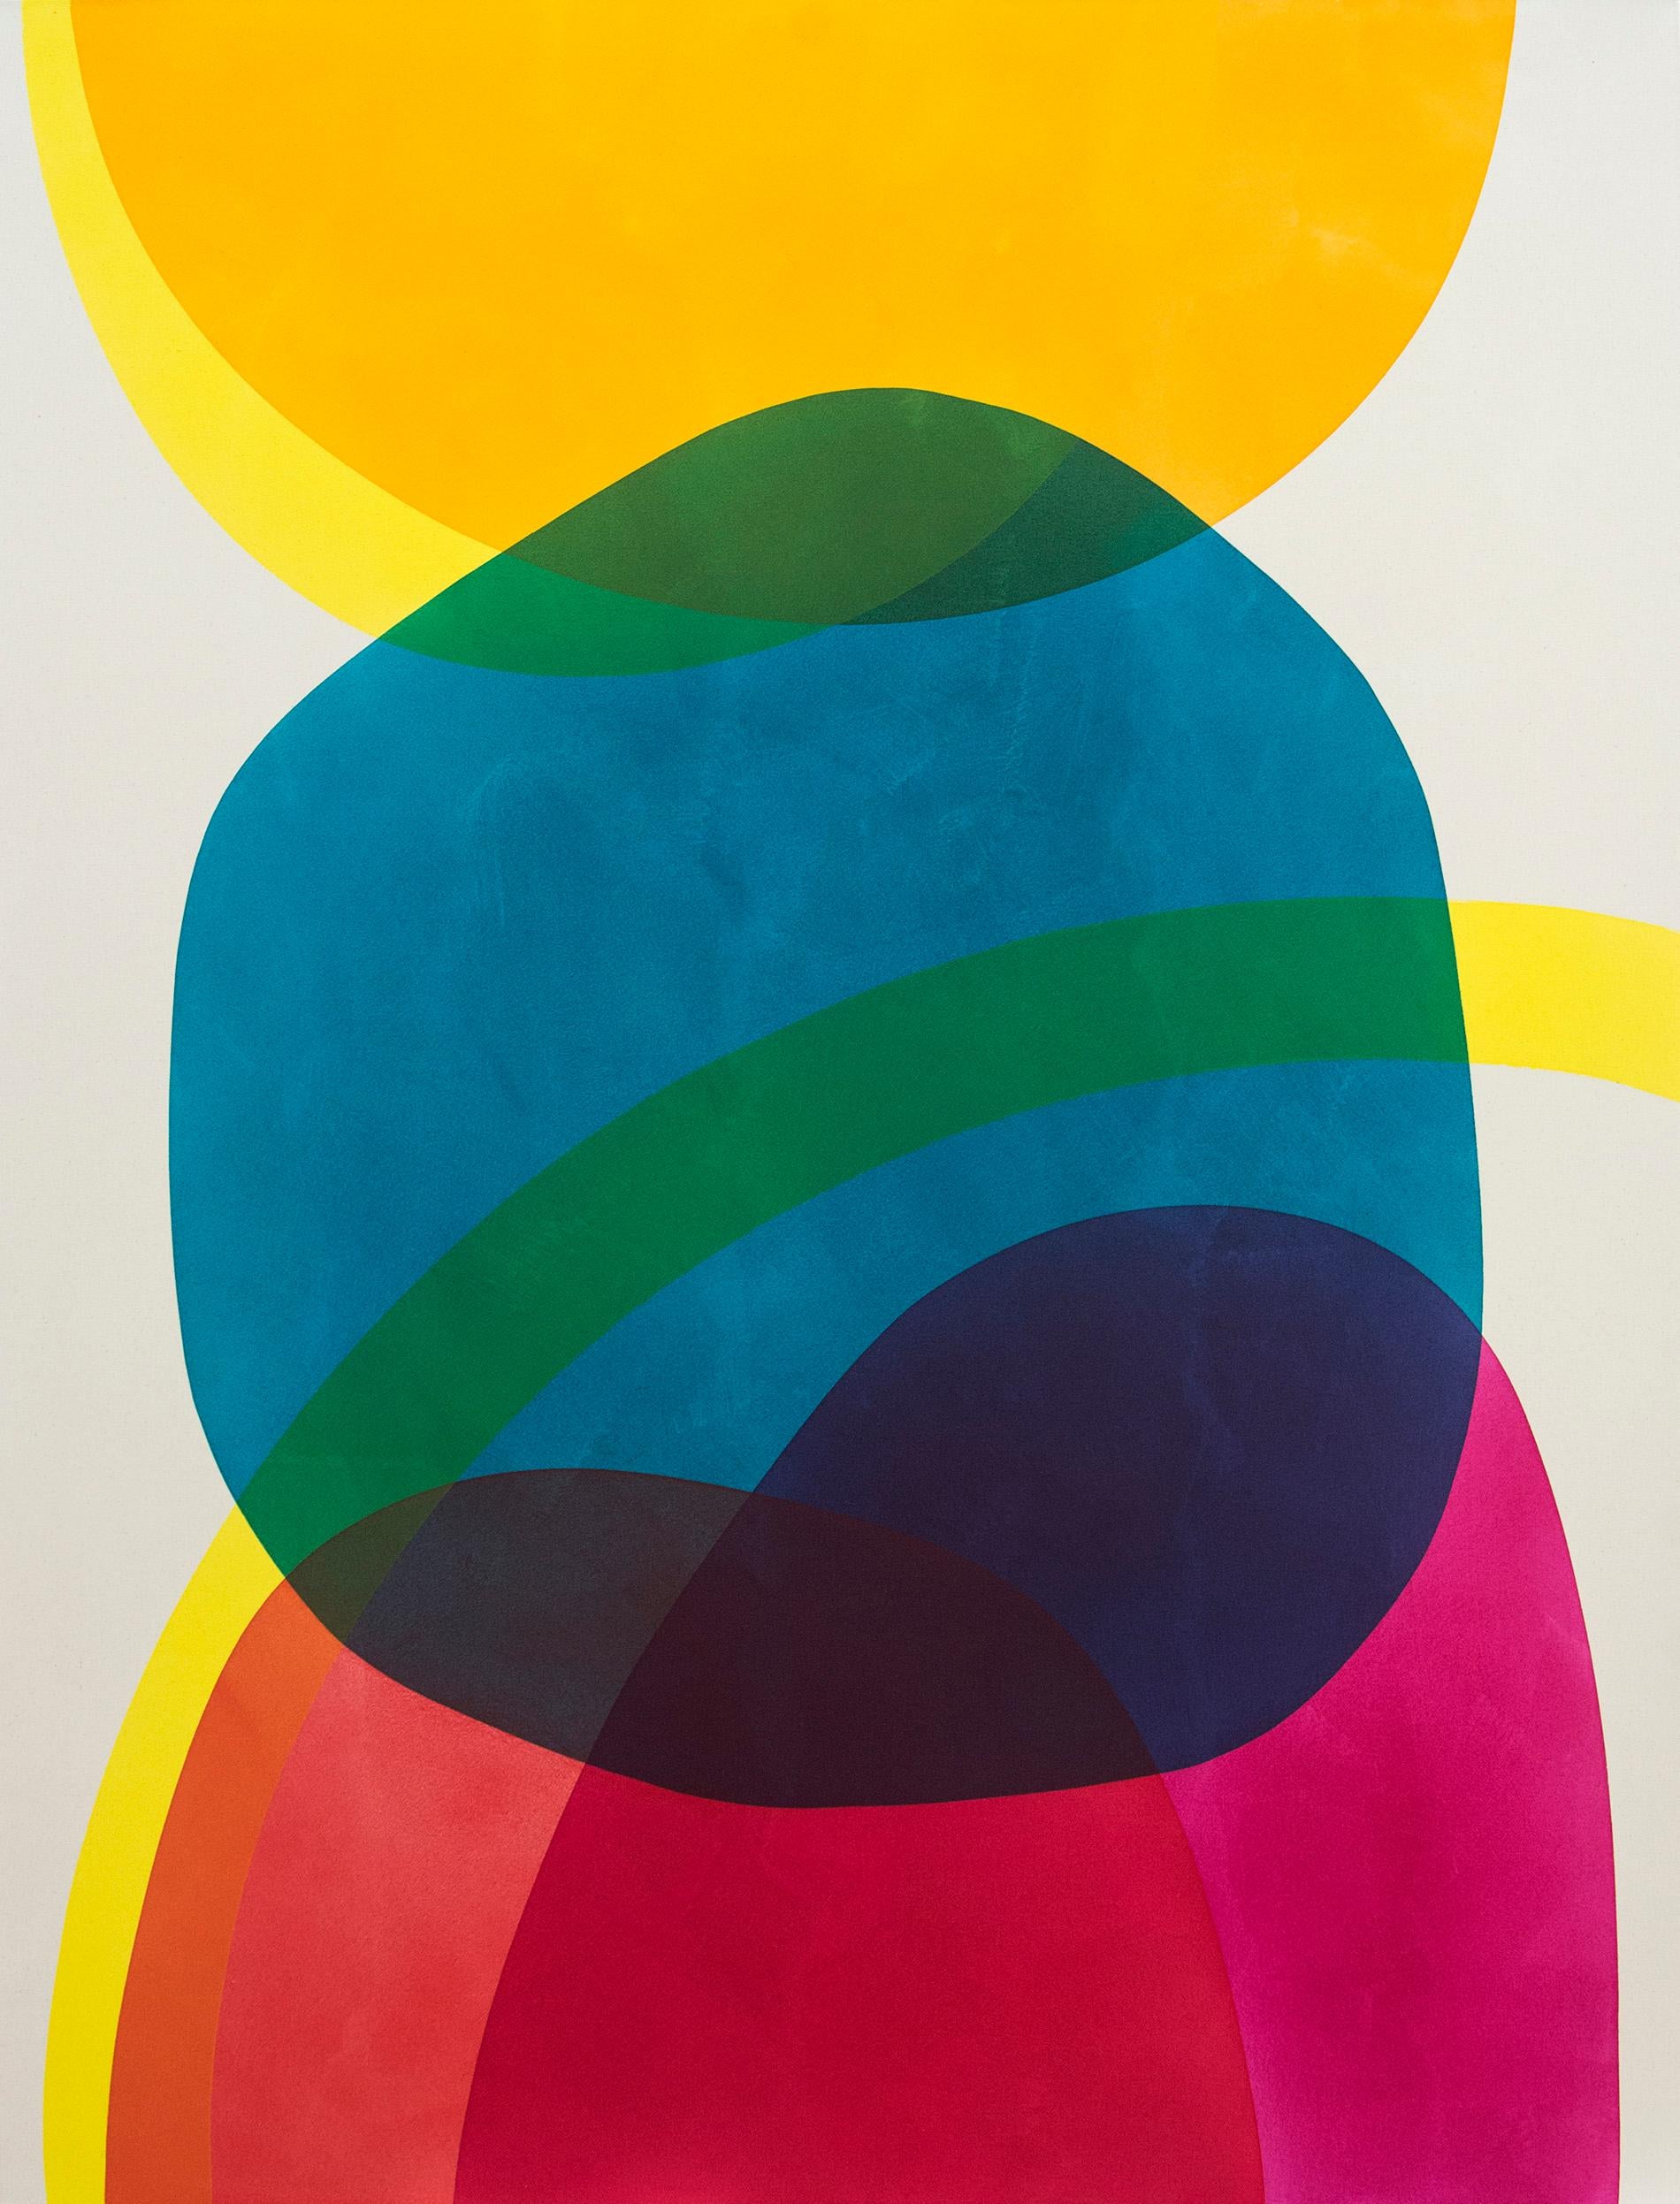 Aron Hill Abstract Painting - 2 Yellow Suns - Bright circular shapes of blue, yellow, red and magenta 